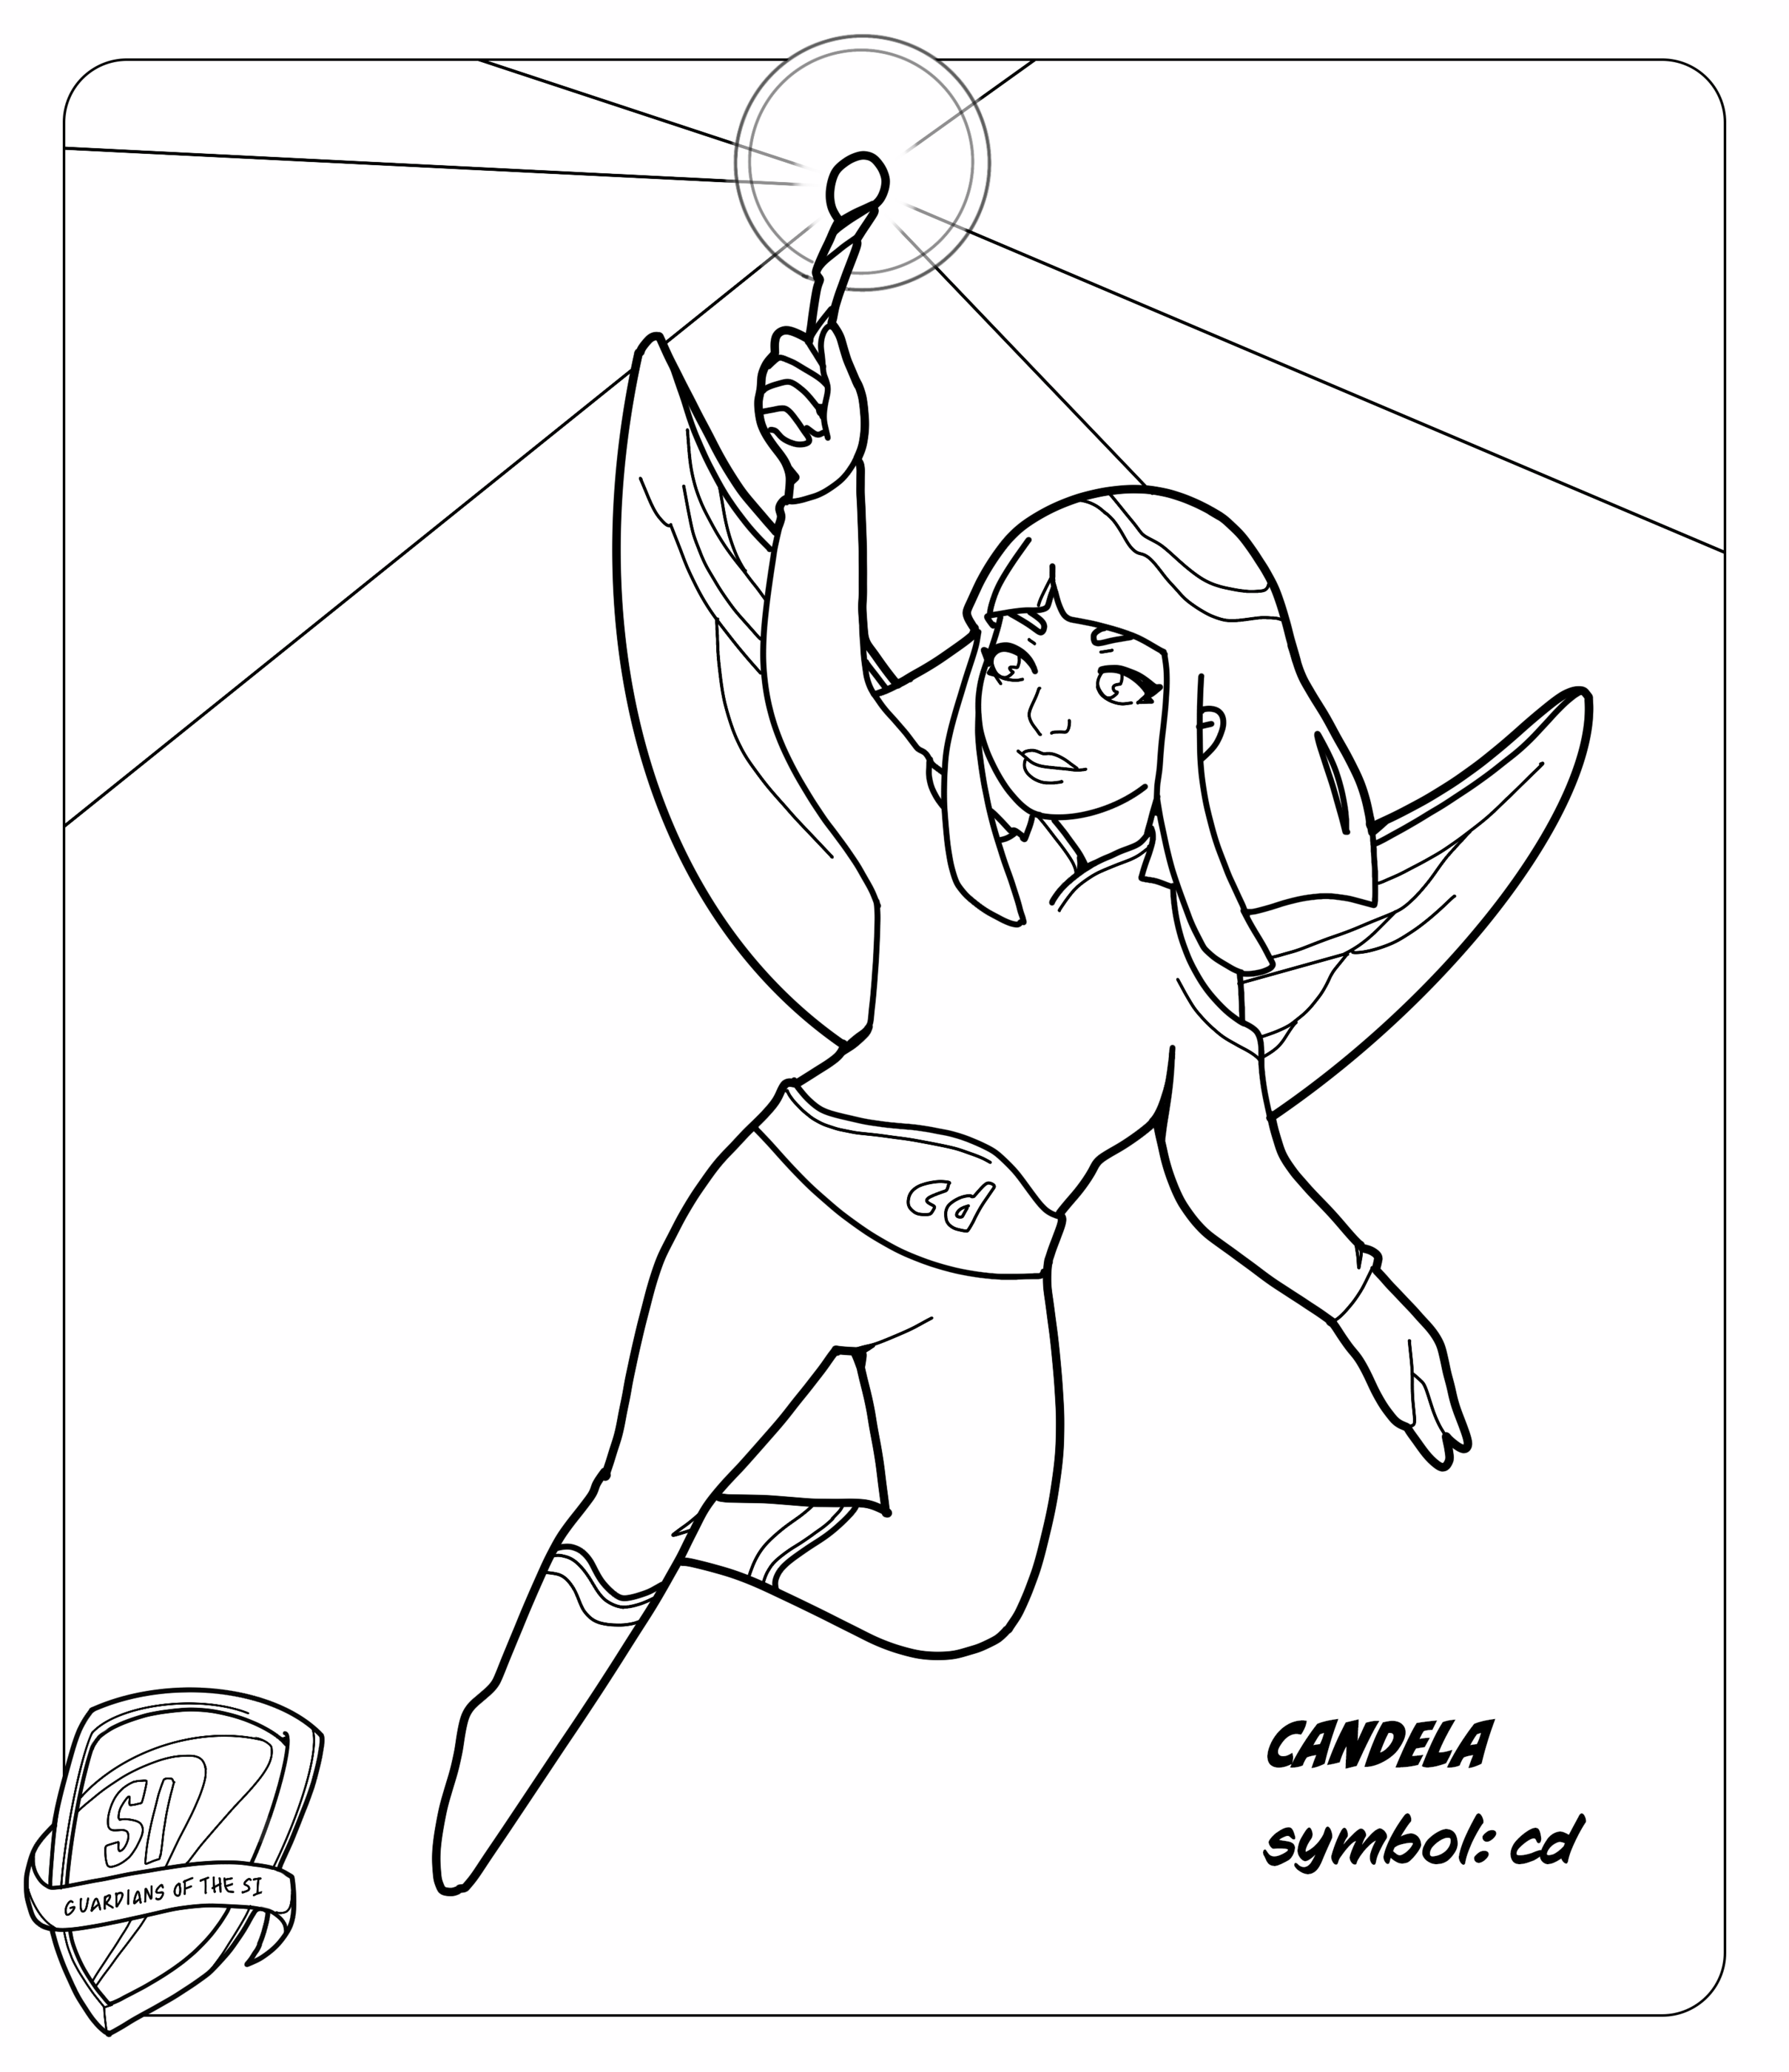 little girl superhero coloring pages